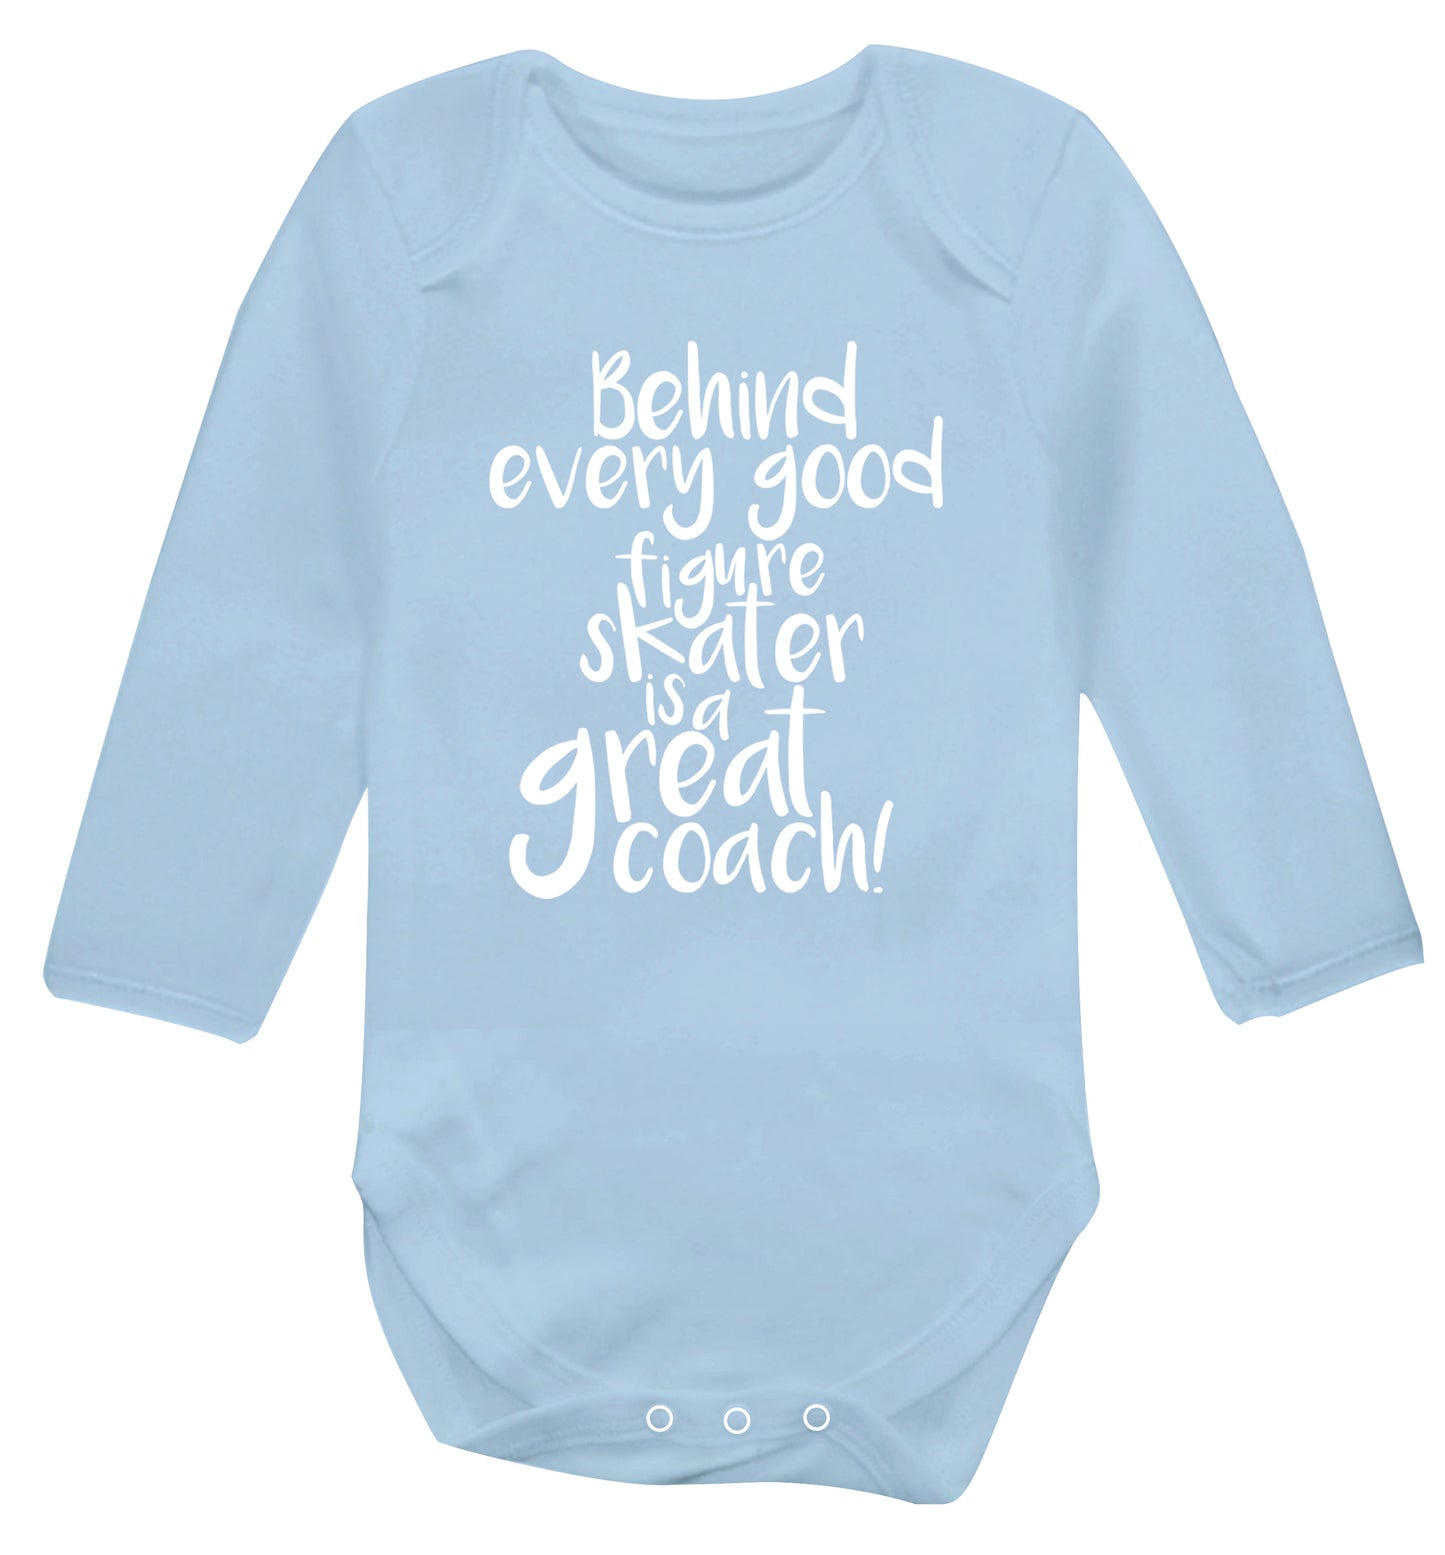 Behind every good figure skater is a great coach Baby Vest long sleeved pale blue 6-12 months